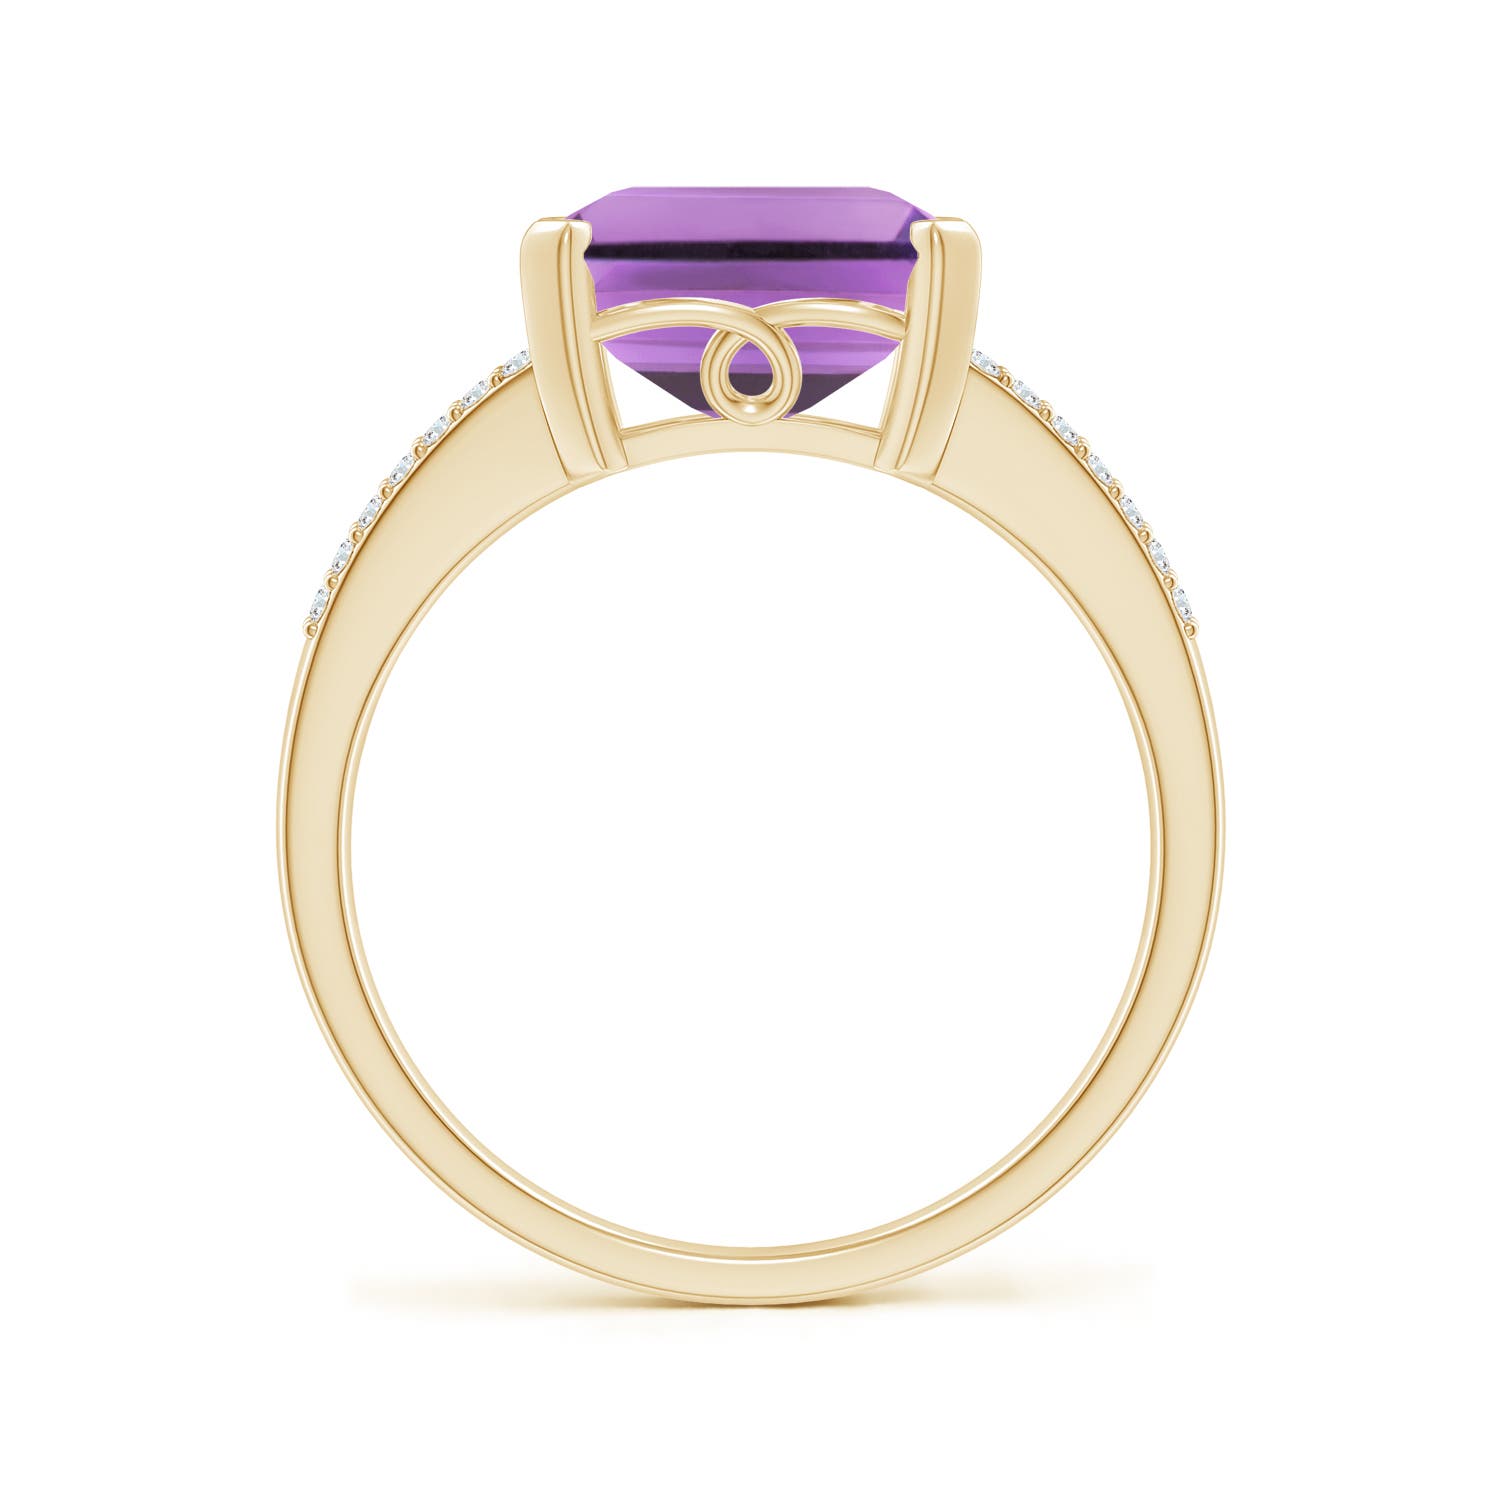 A - Amethyst / 4.14 CT / 14 KT Yellow Gold